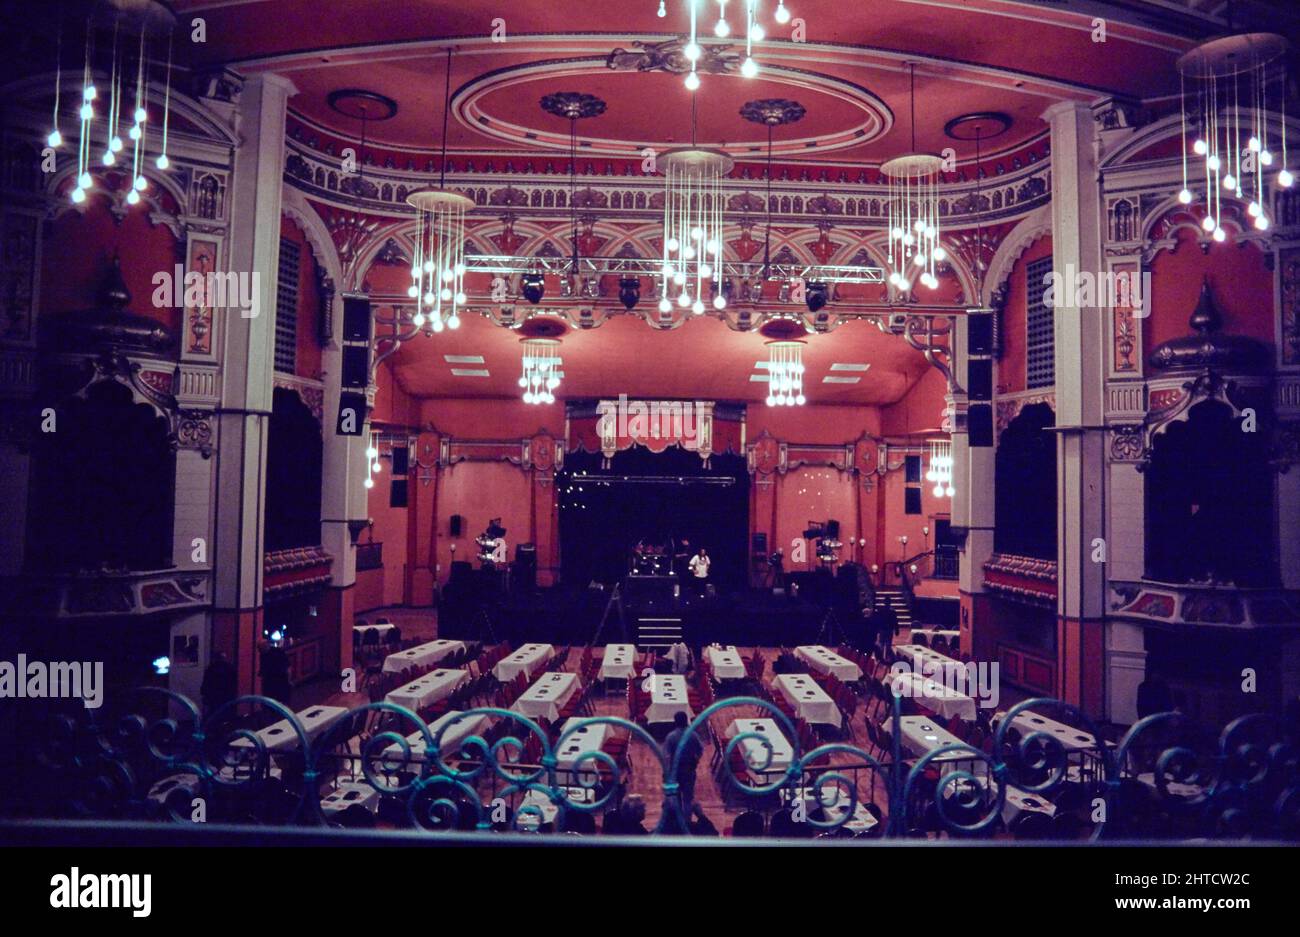 Olypmia Theatre, West Derby Road, Everton, Liverpool, 1990-2015. A view from the circle looking across the auditorium and former stage in the Olympia Theatre, with the space filled with tables. The Olympia Theatre opened in 1905. In 1925 it was briefly closed and reopened as a cinema. It closed in 1939 for the duration of the Second World War. The building became a ballroom in 1948, and then a bingo hall from 1964 until 1982, and then 1987-1990. In the 21st century it operated as a live events venue. Stock Photo